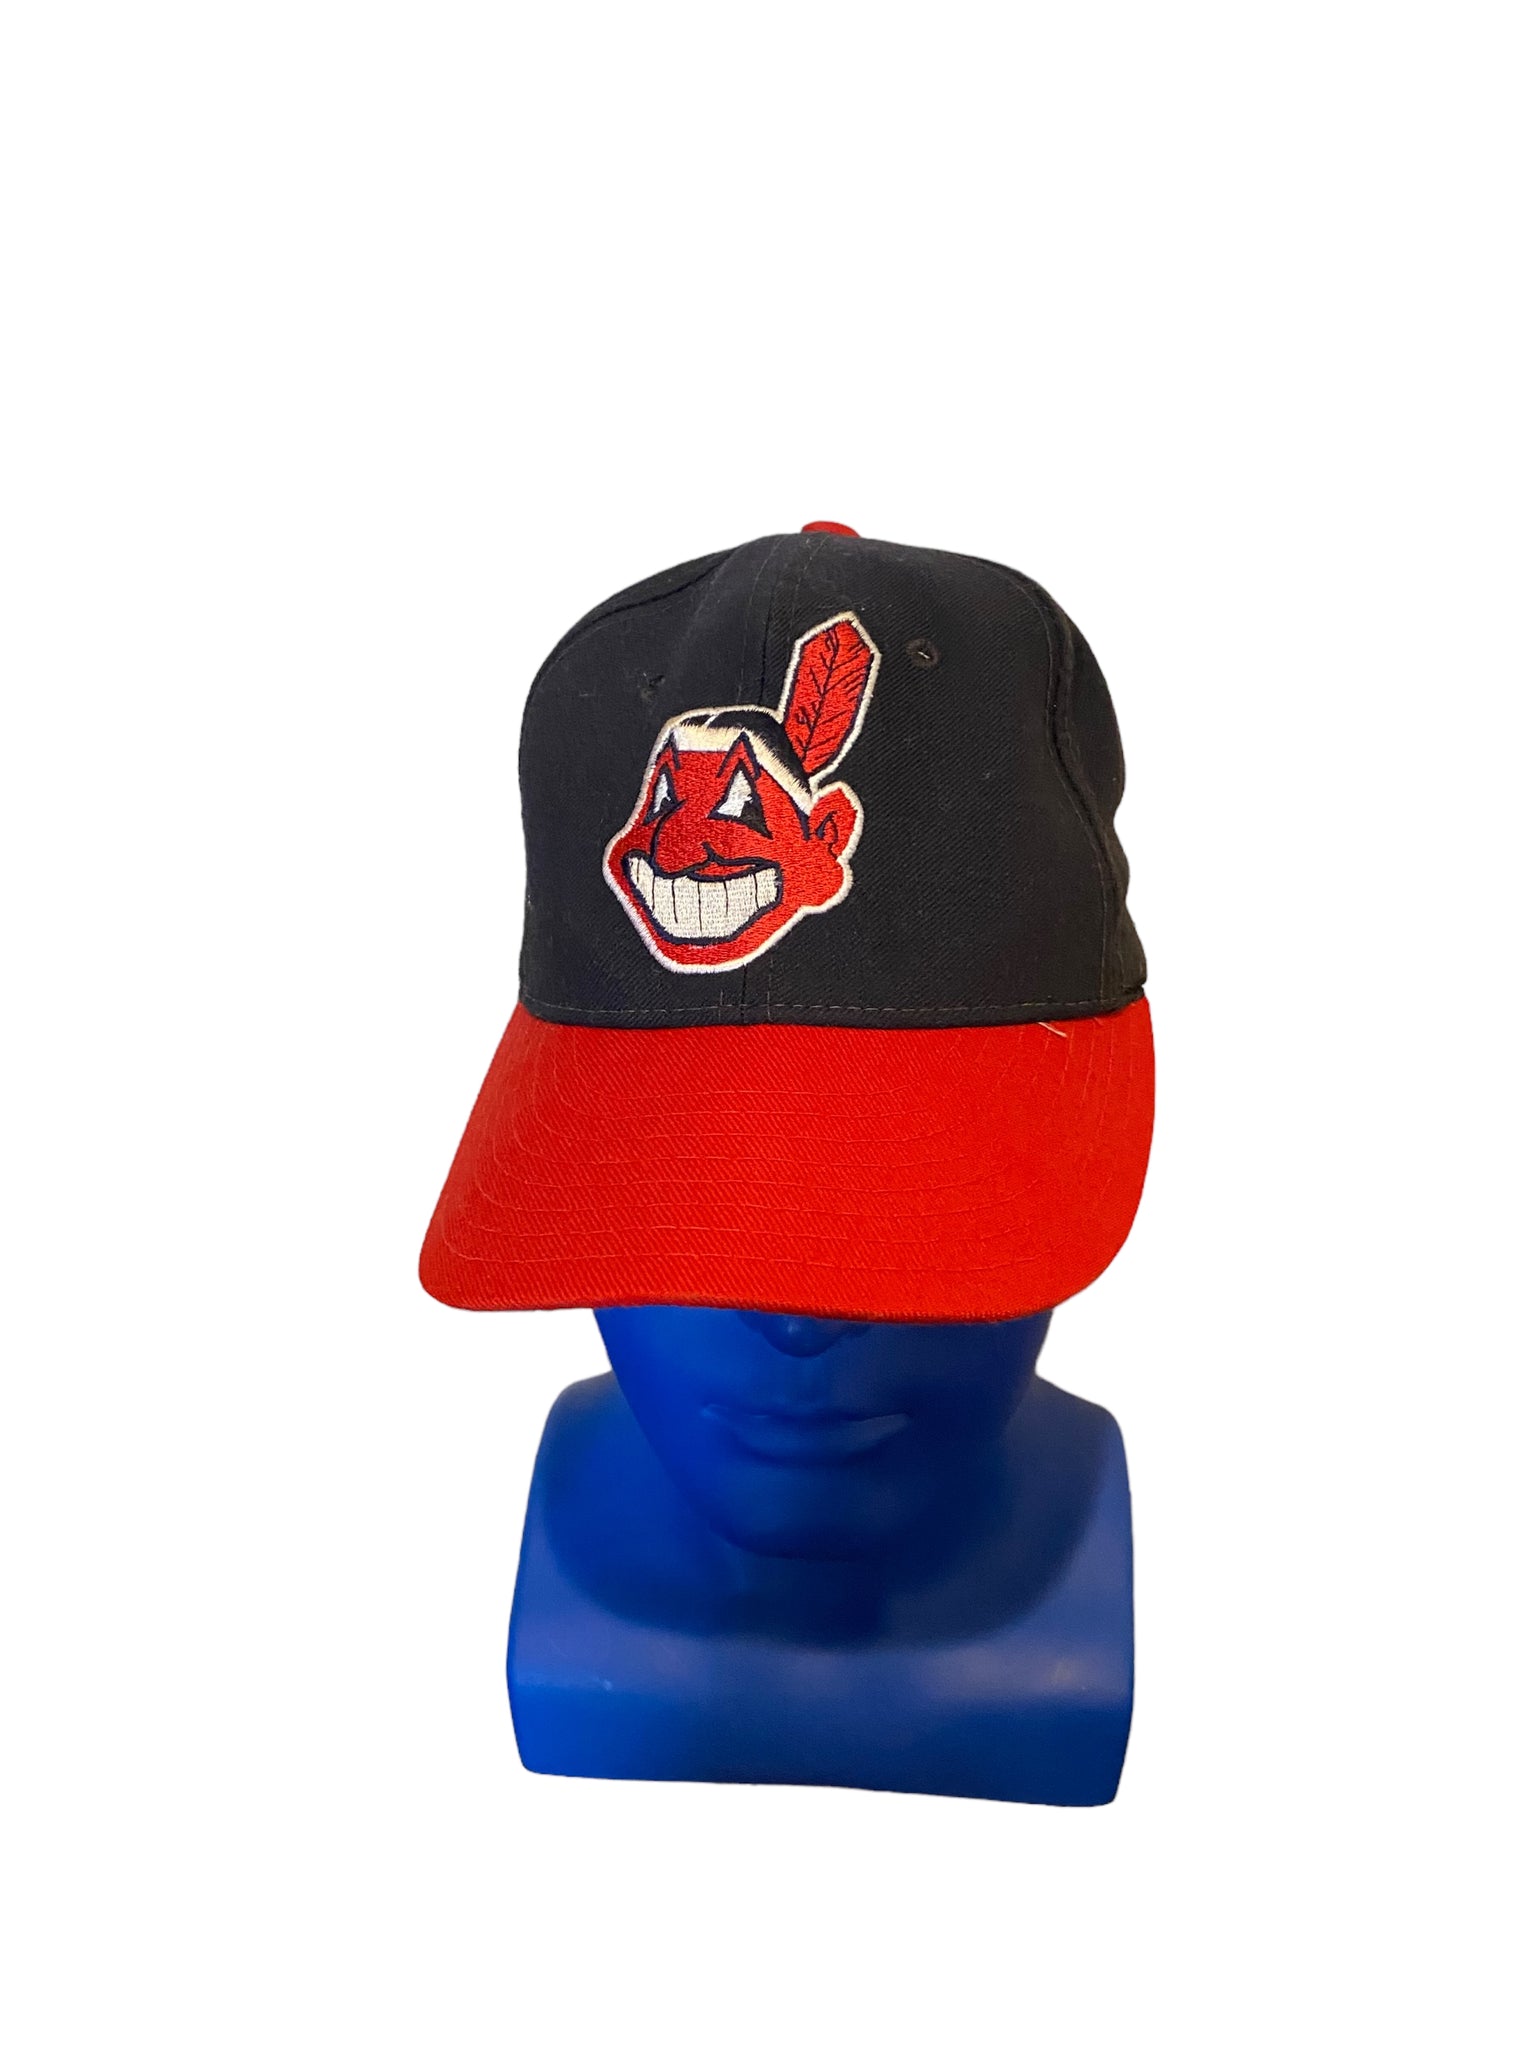 Vintage New Era Cleveland Indians Diamond Collection wool fitted hat size 7 1/8